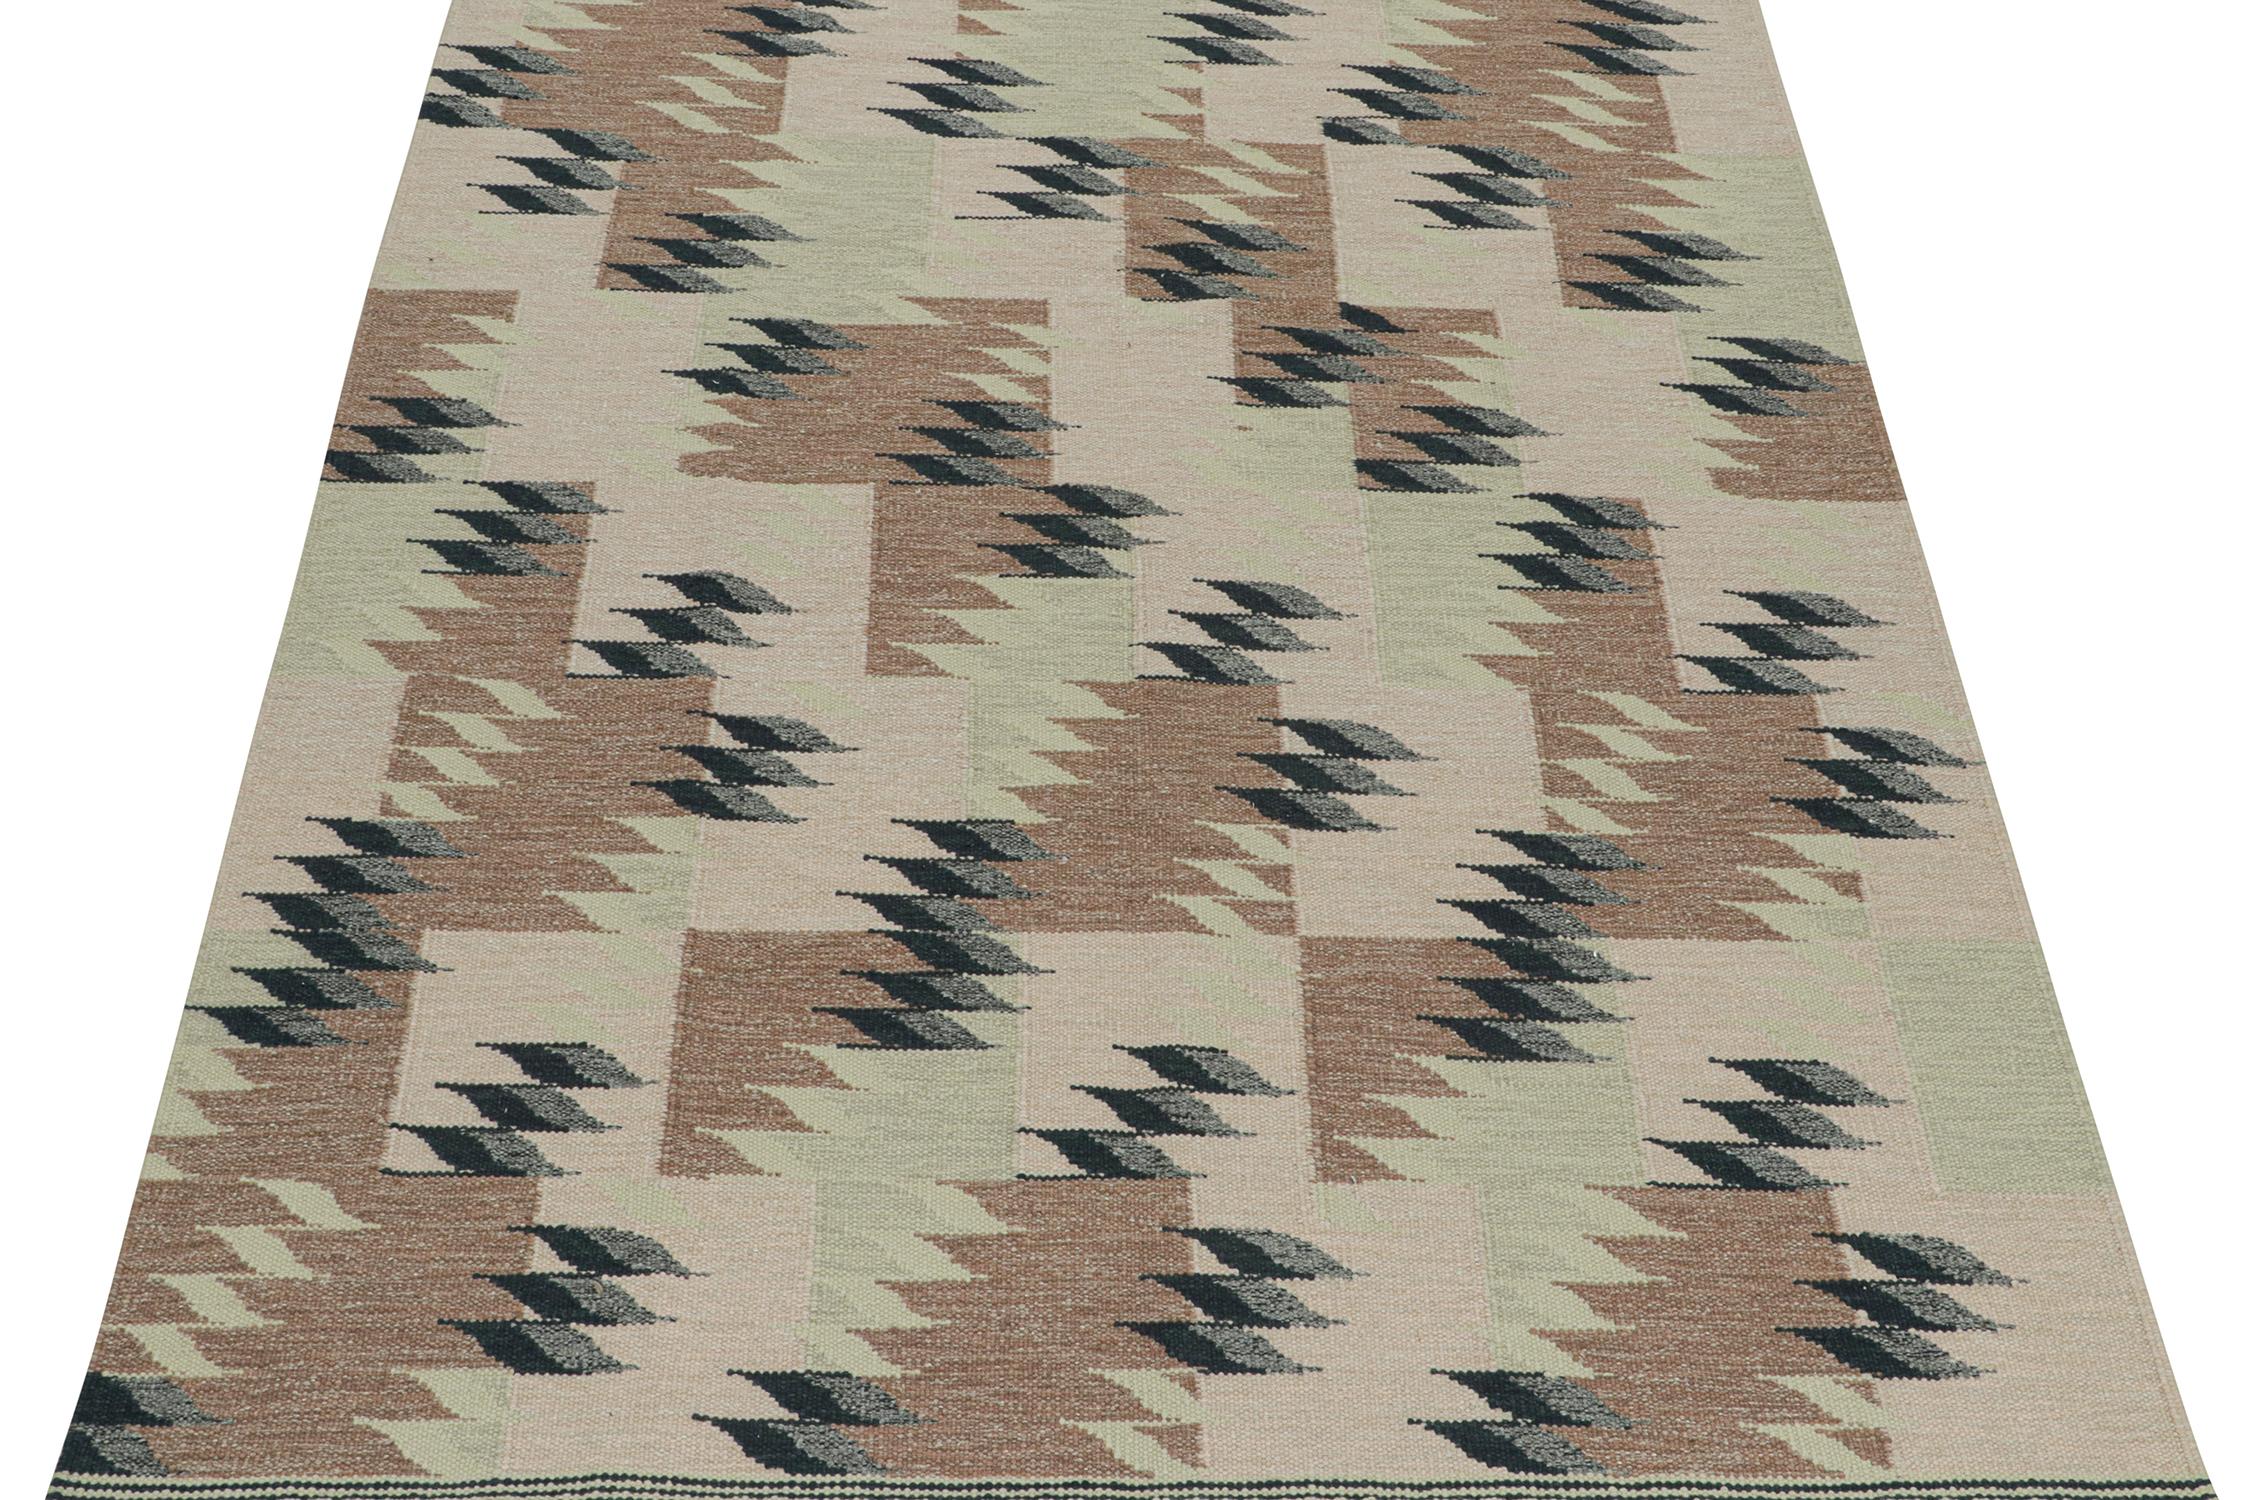 This 8x10 Kilim is a bold new addition to the Scandinavian Collection by Rug & Kilim. Handwoven in wool and natural yarns, its design reflects a contemporary take on mid-century Rollakans and Swedish Deco style.

On the Design:

This new flat